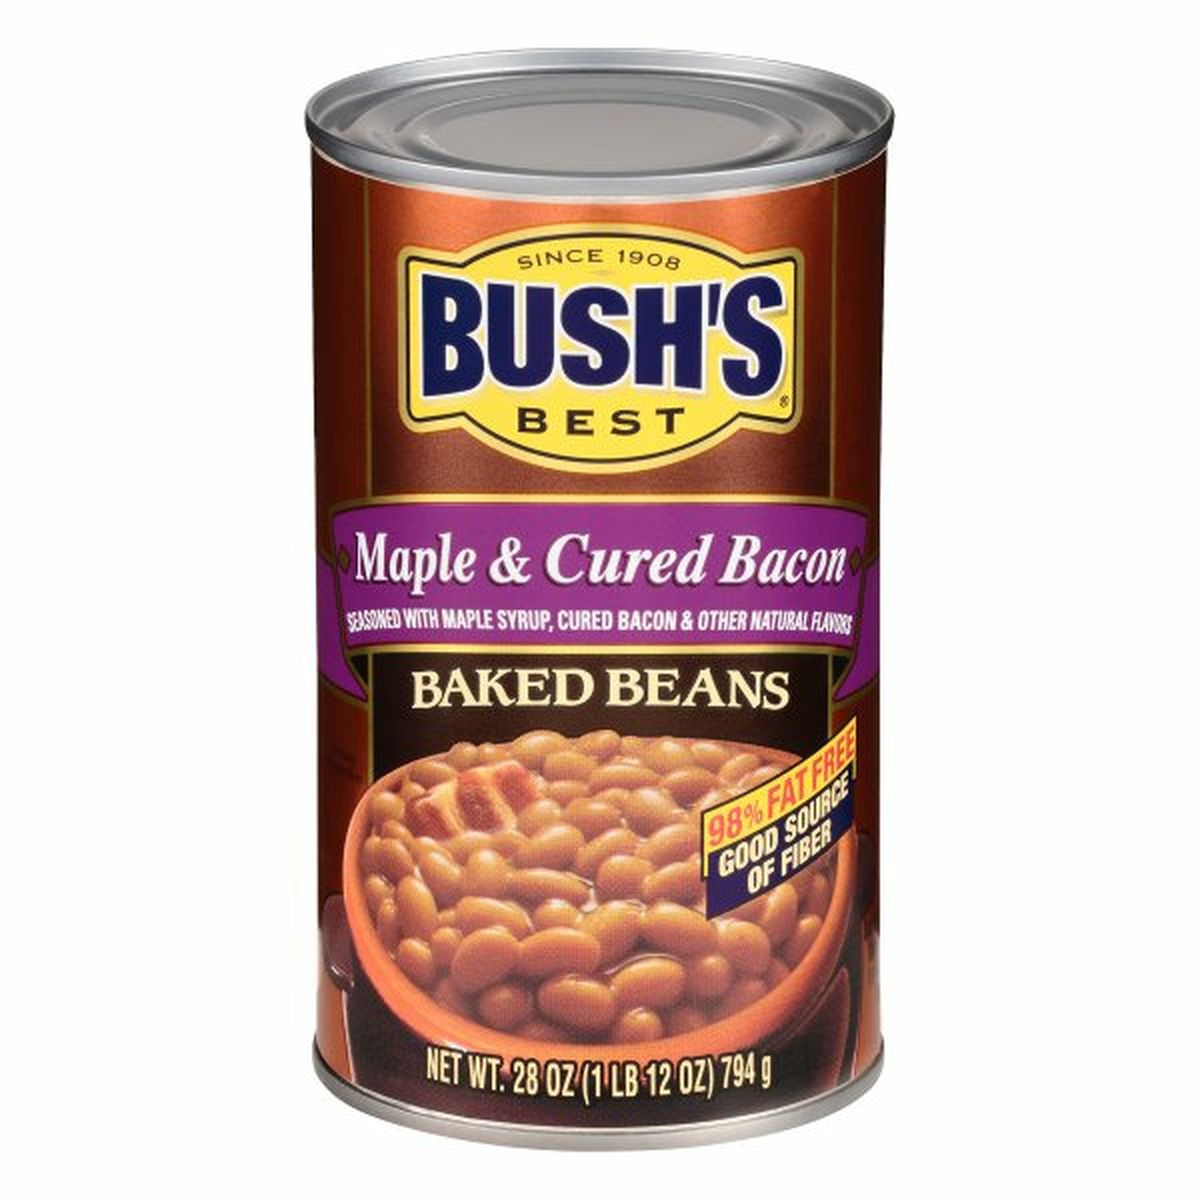 Calories in Bush's Best Baked Beans, Maple & Cured Bacon